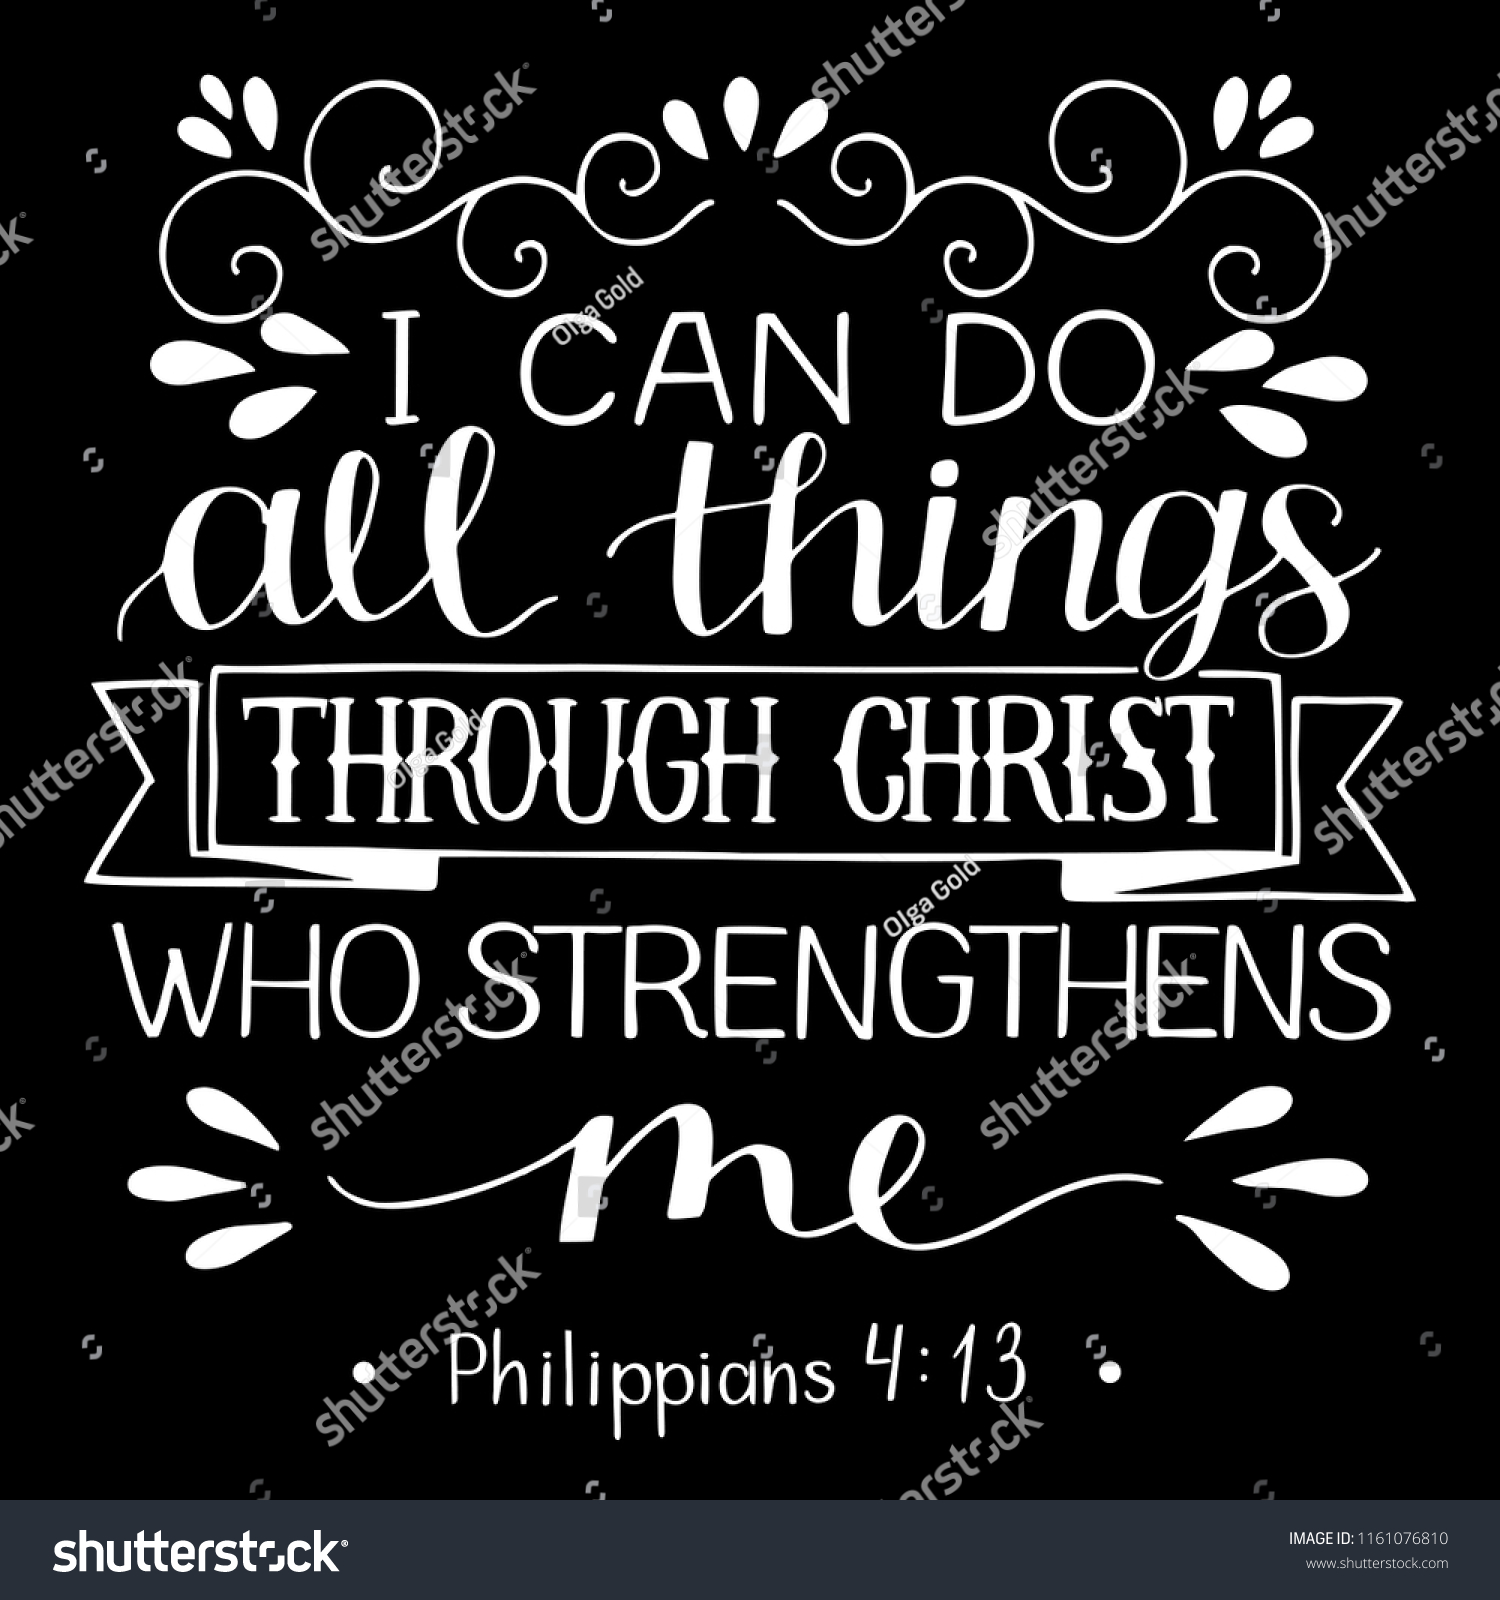 SVG of Hand lettering I can do ALL things through CHRIST who strengthens me. Biblical background. Christian poster. Scripture prints. Quote svg